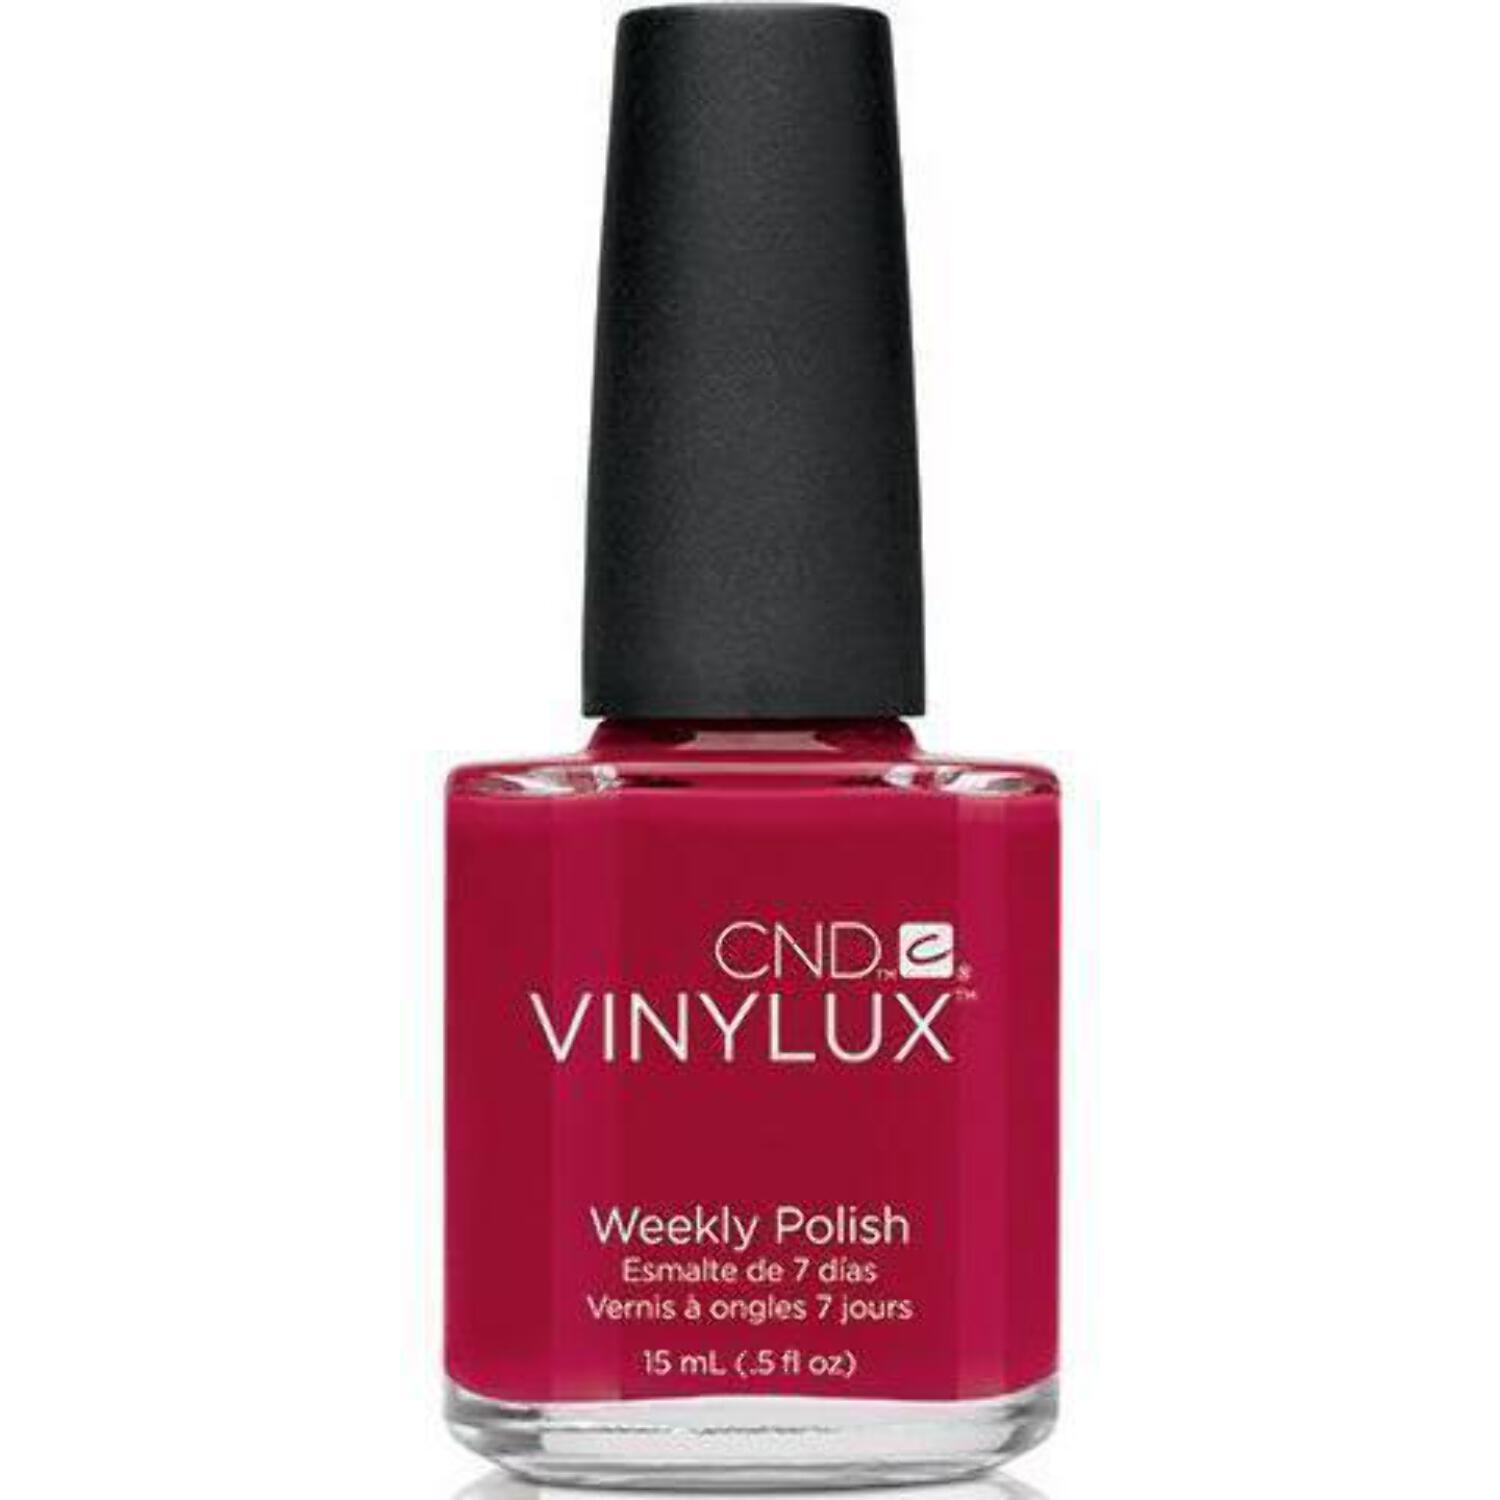 CND Vinylux Wildfire 0.5 oz - image 1 of 1